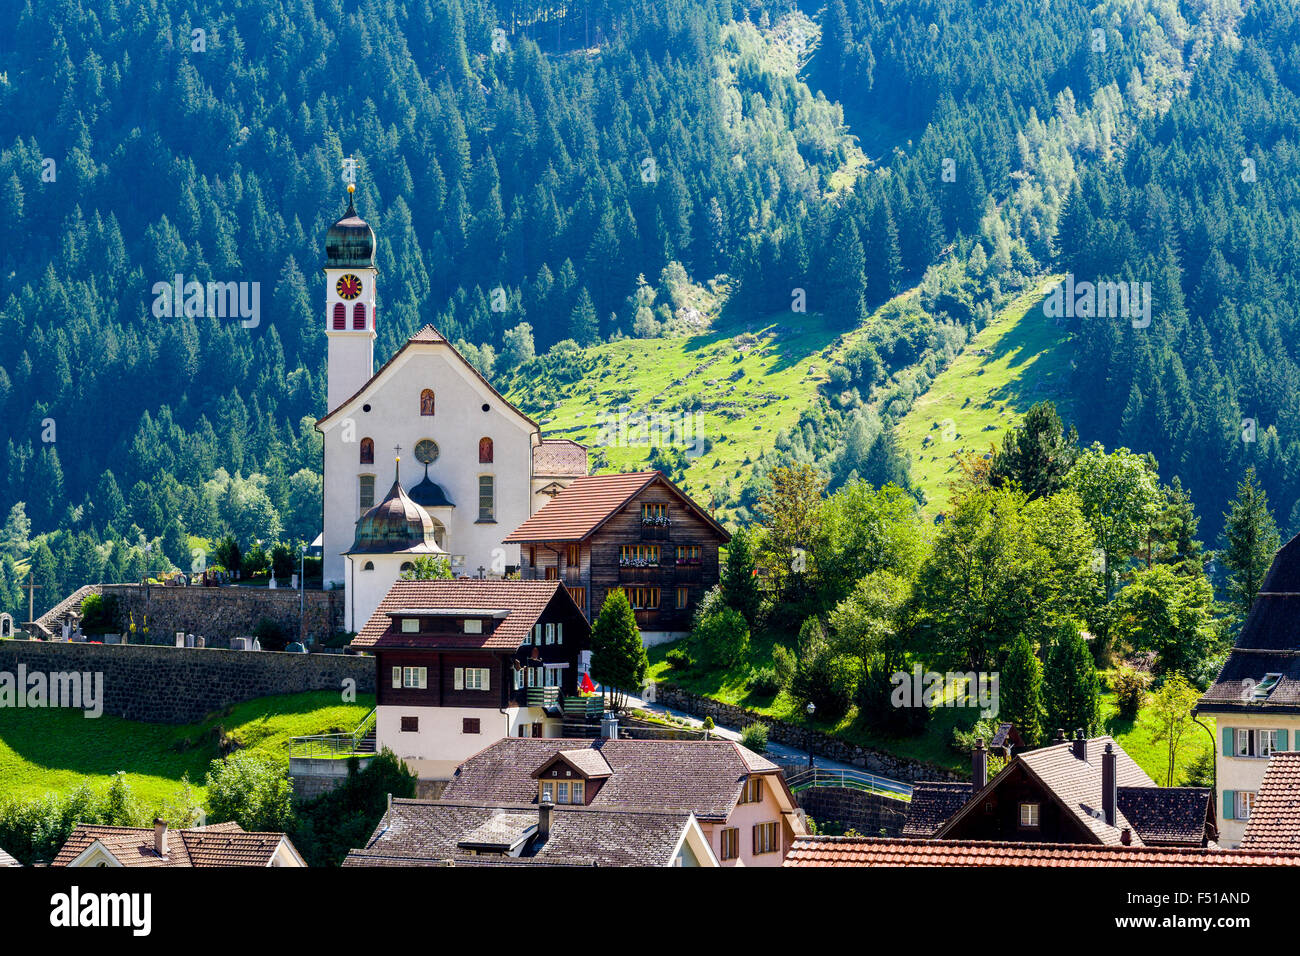 The village with a church is located in a high altitude landscape with mountains, green meadows and trees Stock Photo